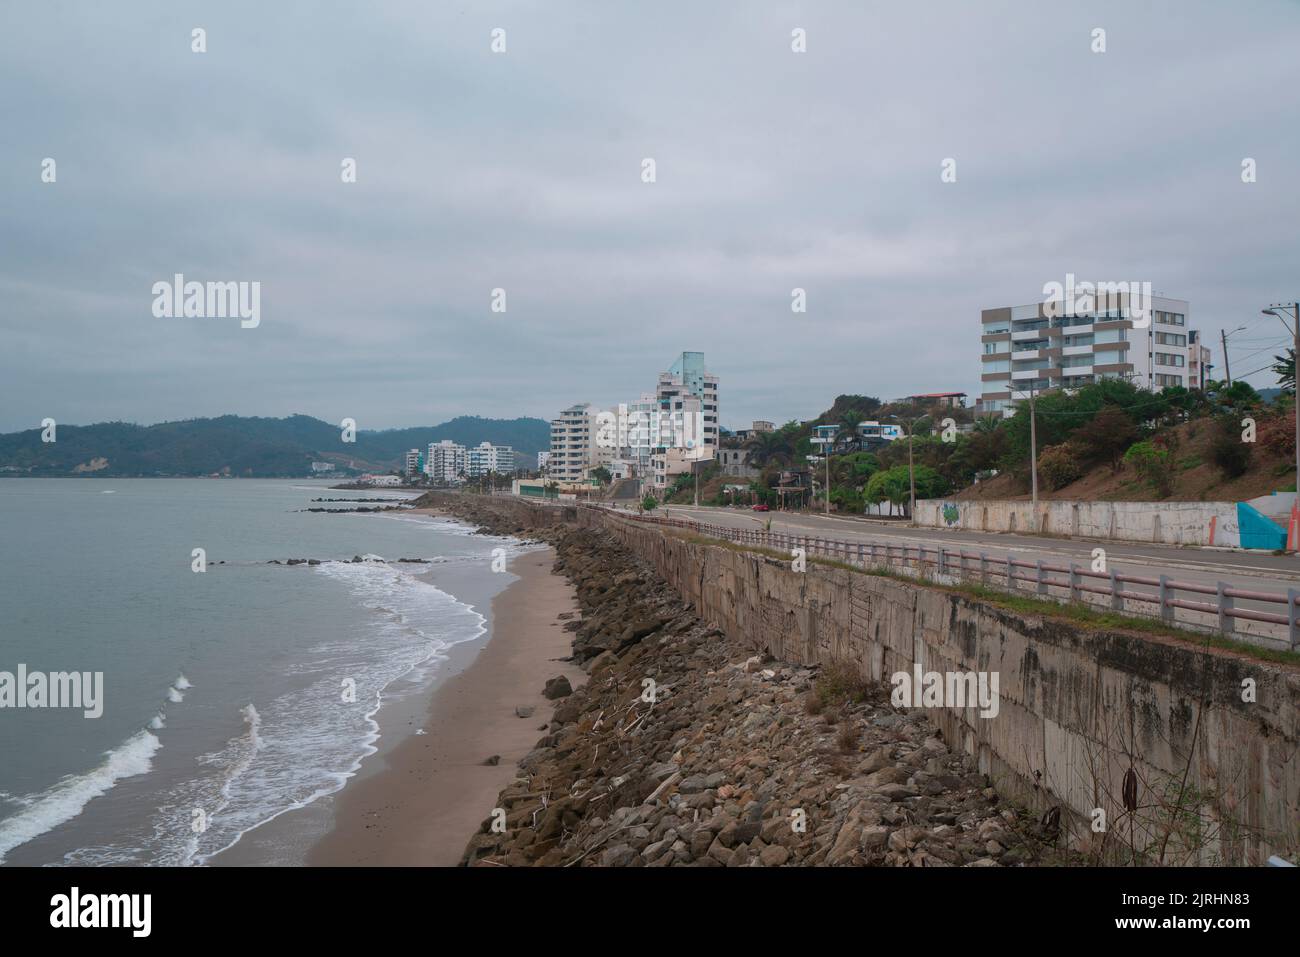 Bahia de Caraquez, Manabi / Ecuador - August 21 2022: Vehicles traveling on the avenue that borders the beach with a panoramic view of the city on a c Stock Photo